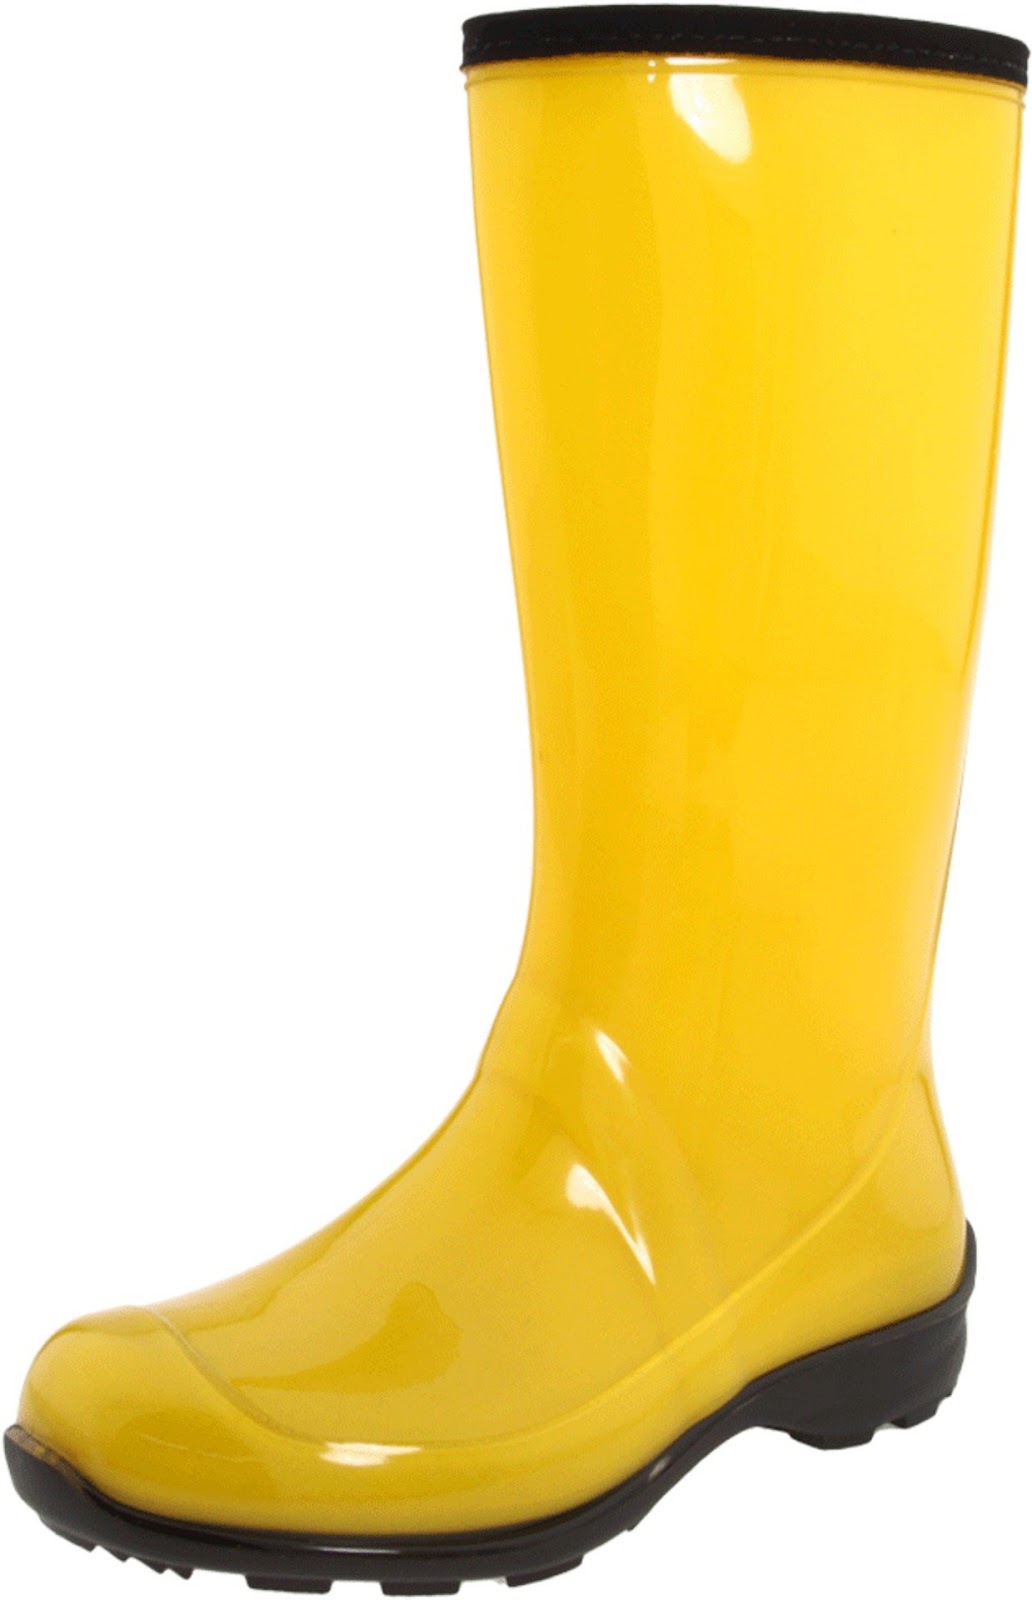 Rain boots in puddle free clipart images